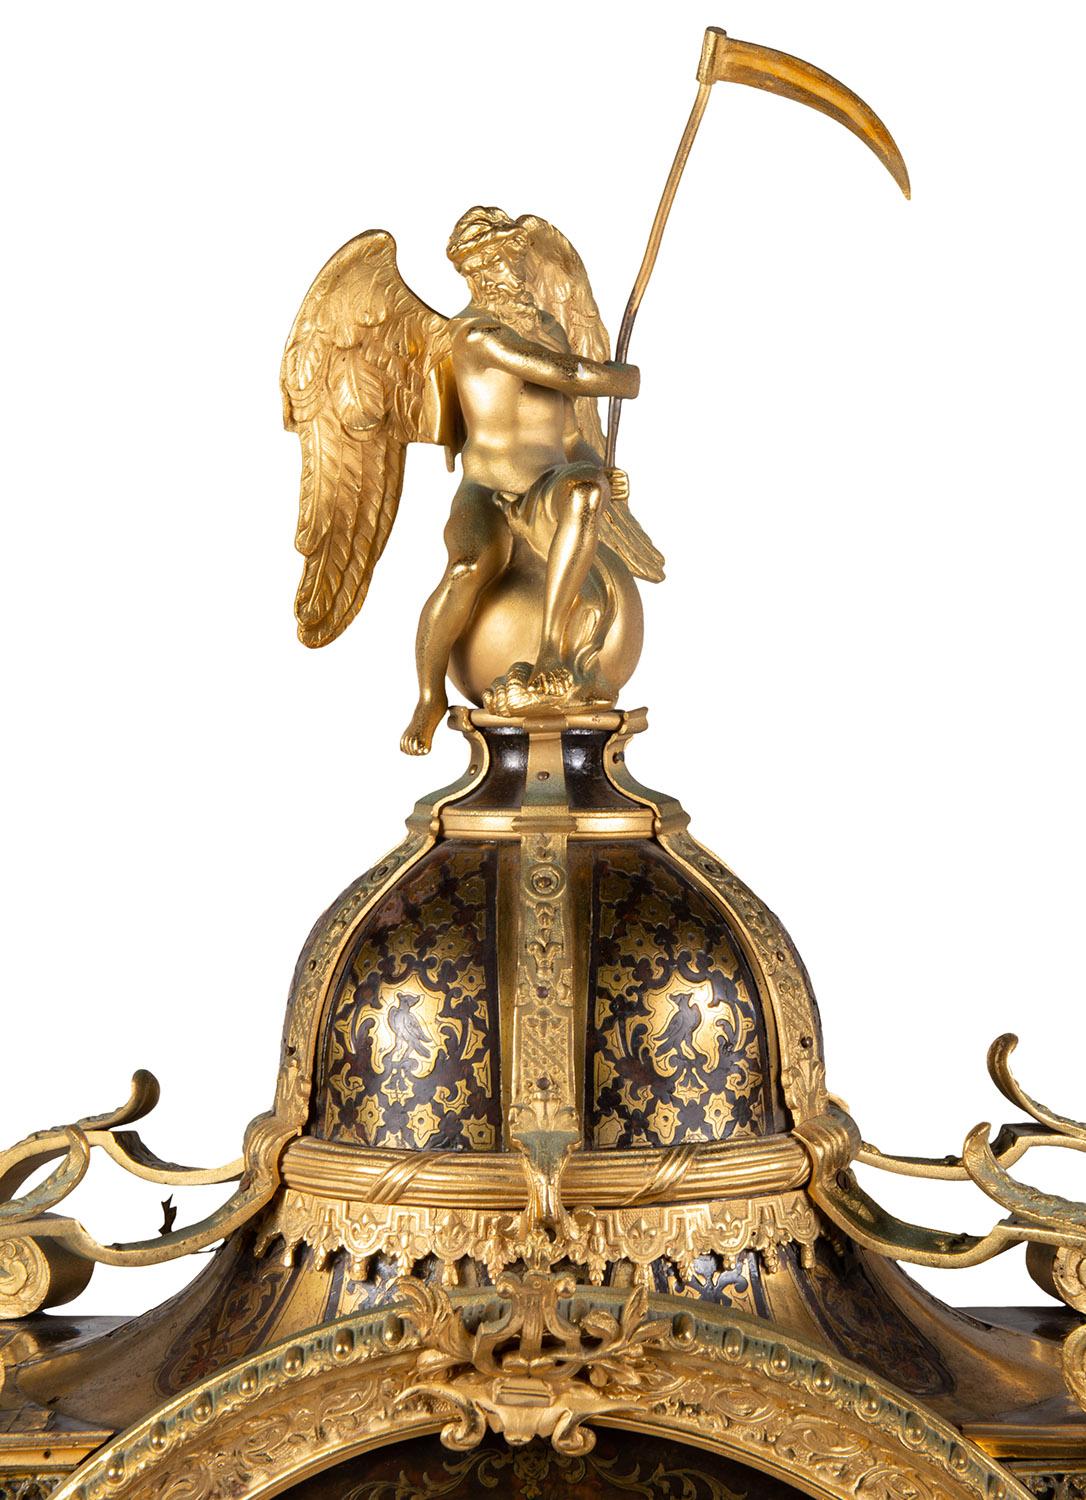 A very good quality 19th Century French Louis XVI style Boulle mantel clock, having Father Time perched above the brass inlaid dome, scrolling foliate ormolu mounts, white enamel Roman numerals to the eight day duration movement, striking on the